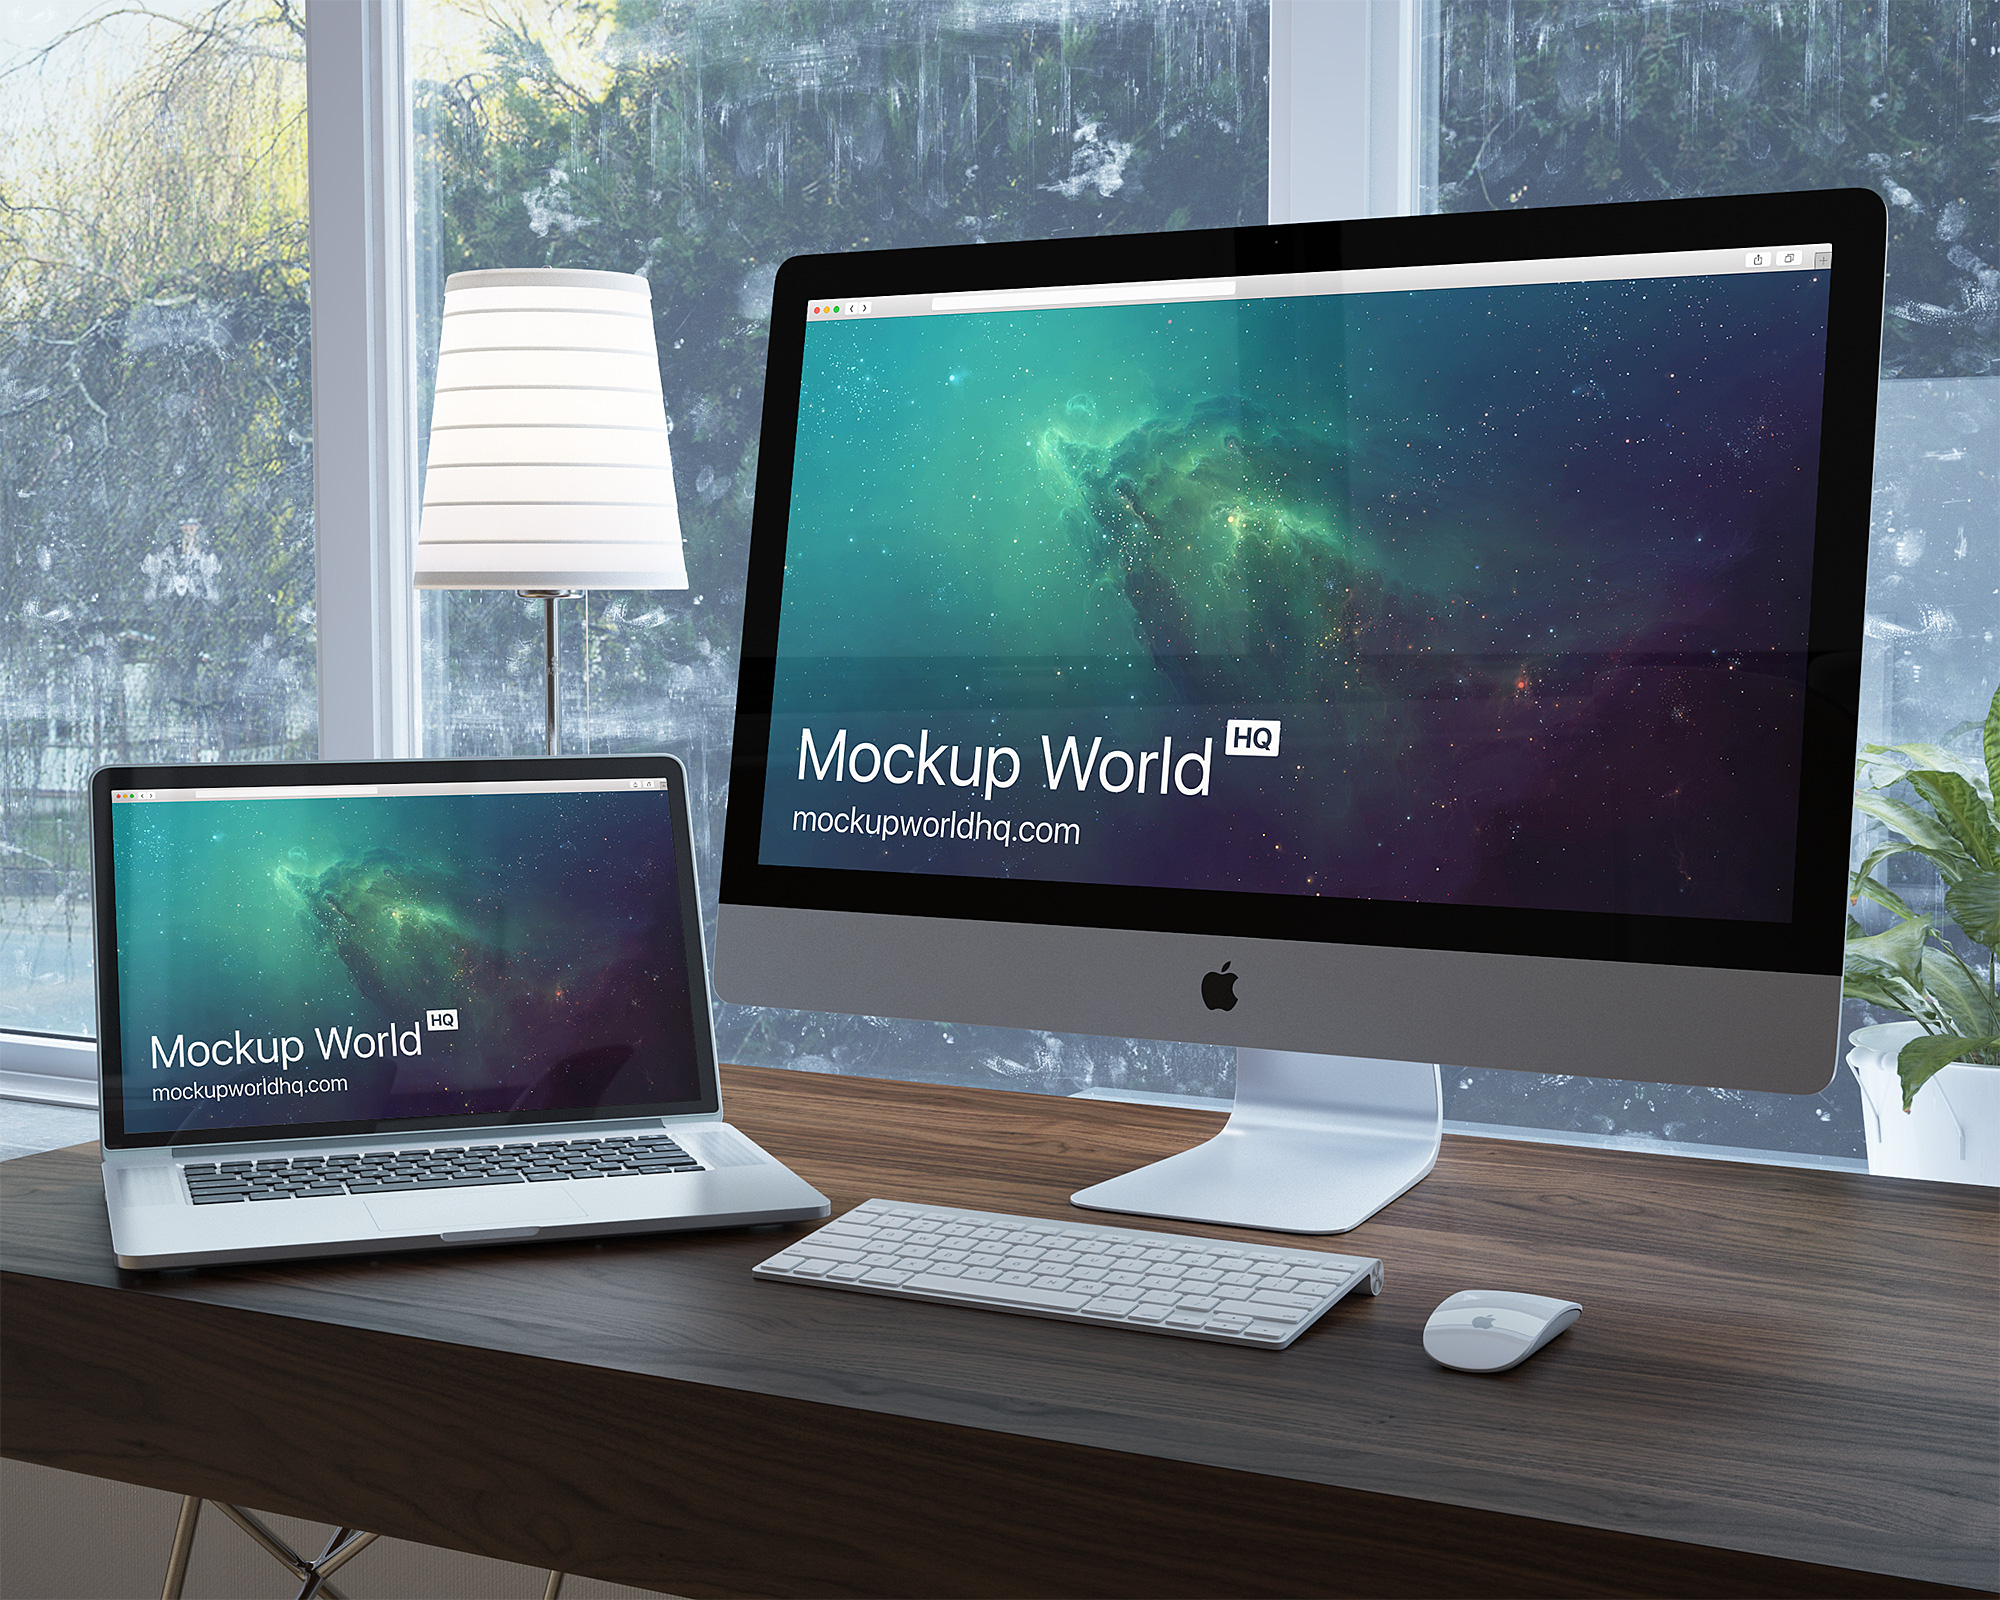 office 2013 for mac free